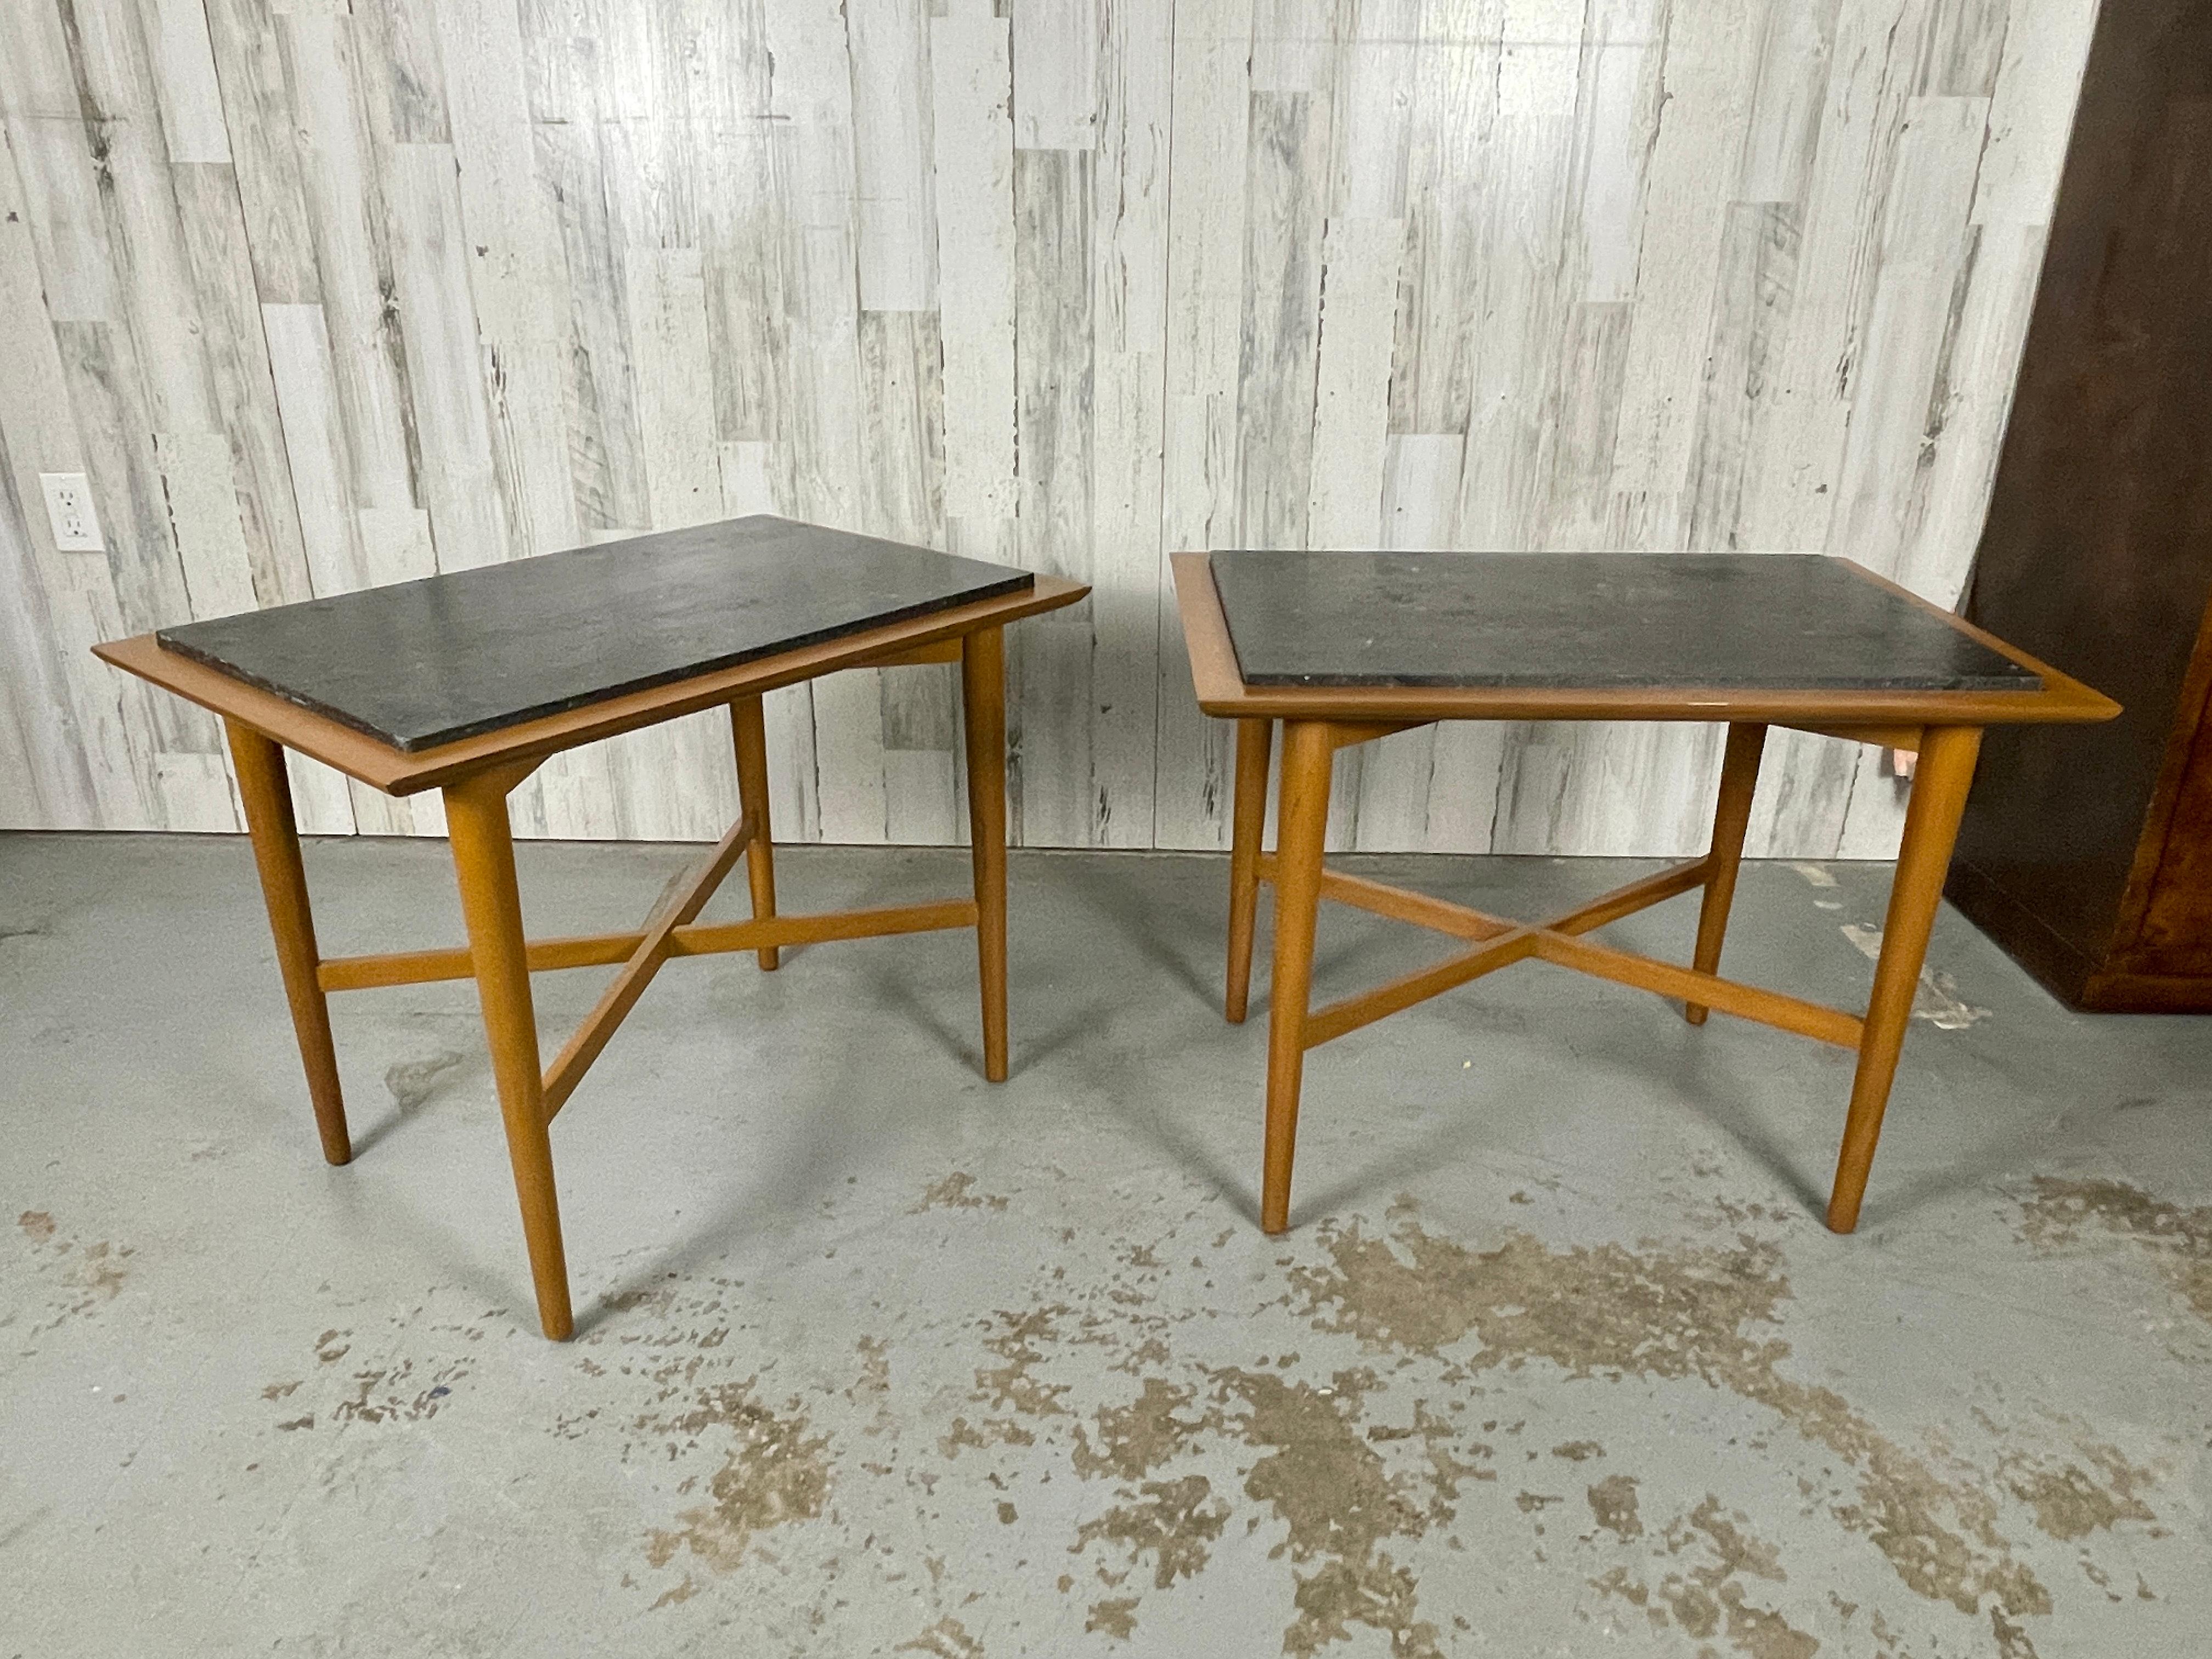 Wooden X Base Granite Top Side Tables In Good Condition For Sale In Denton, TX